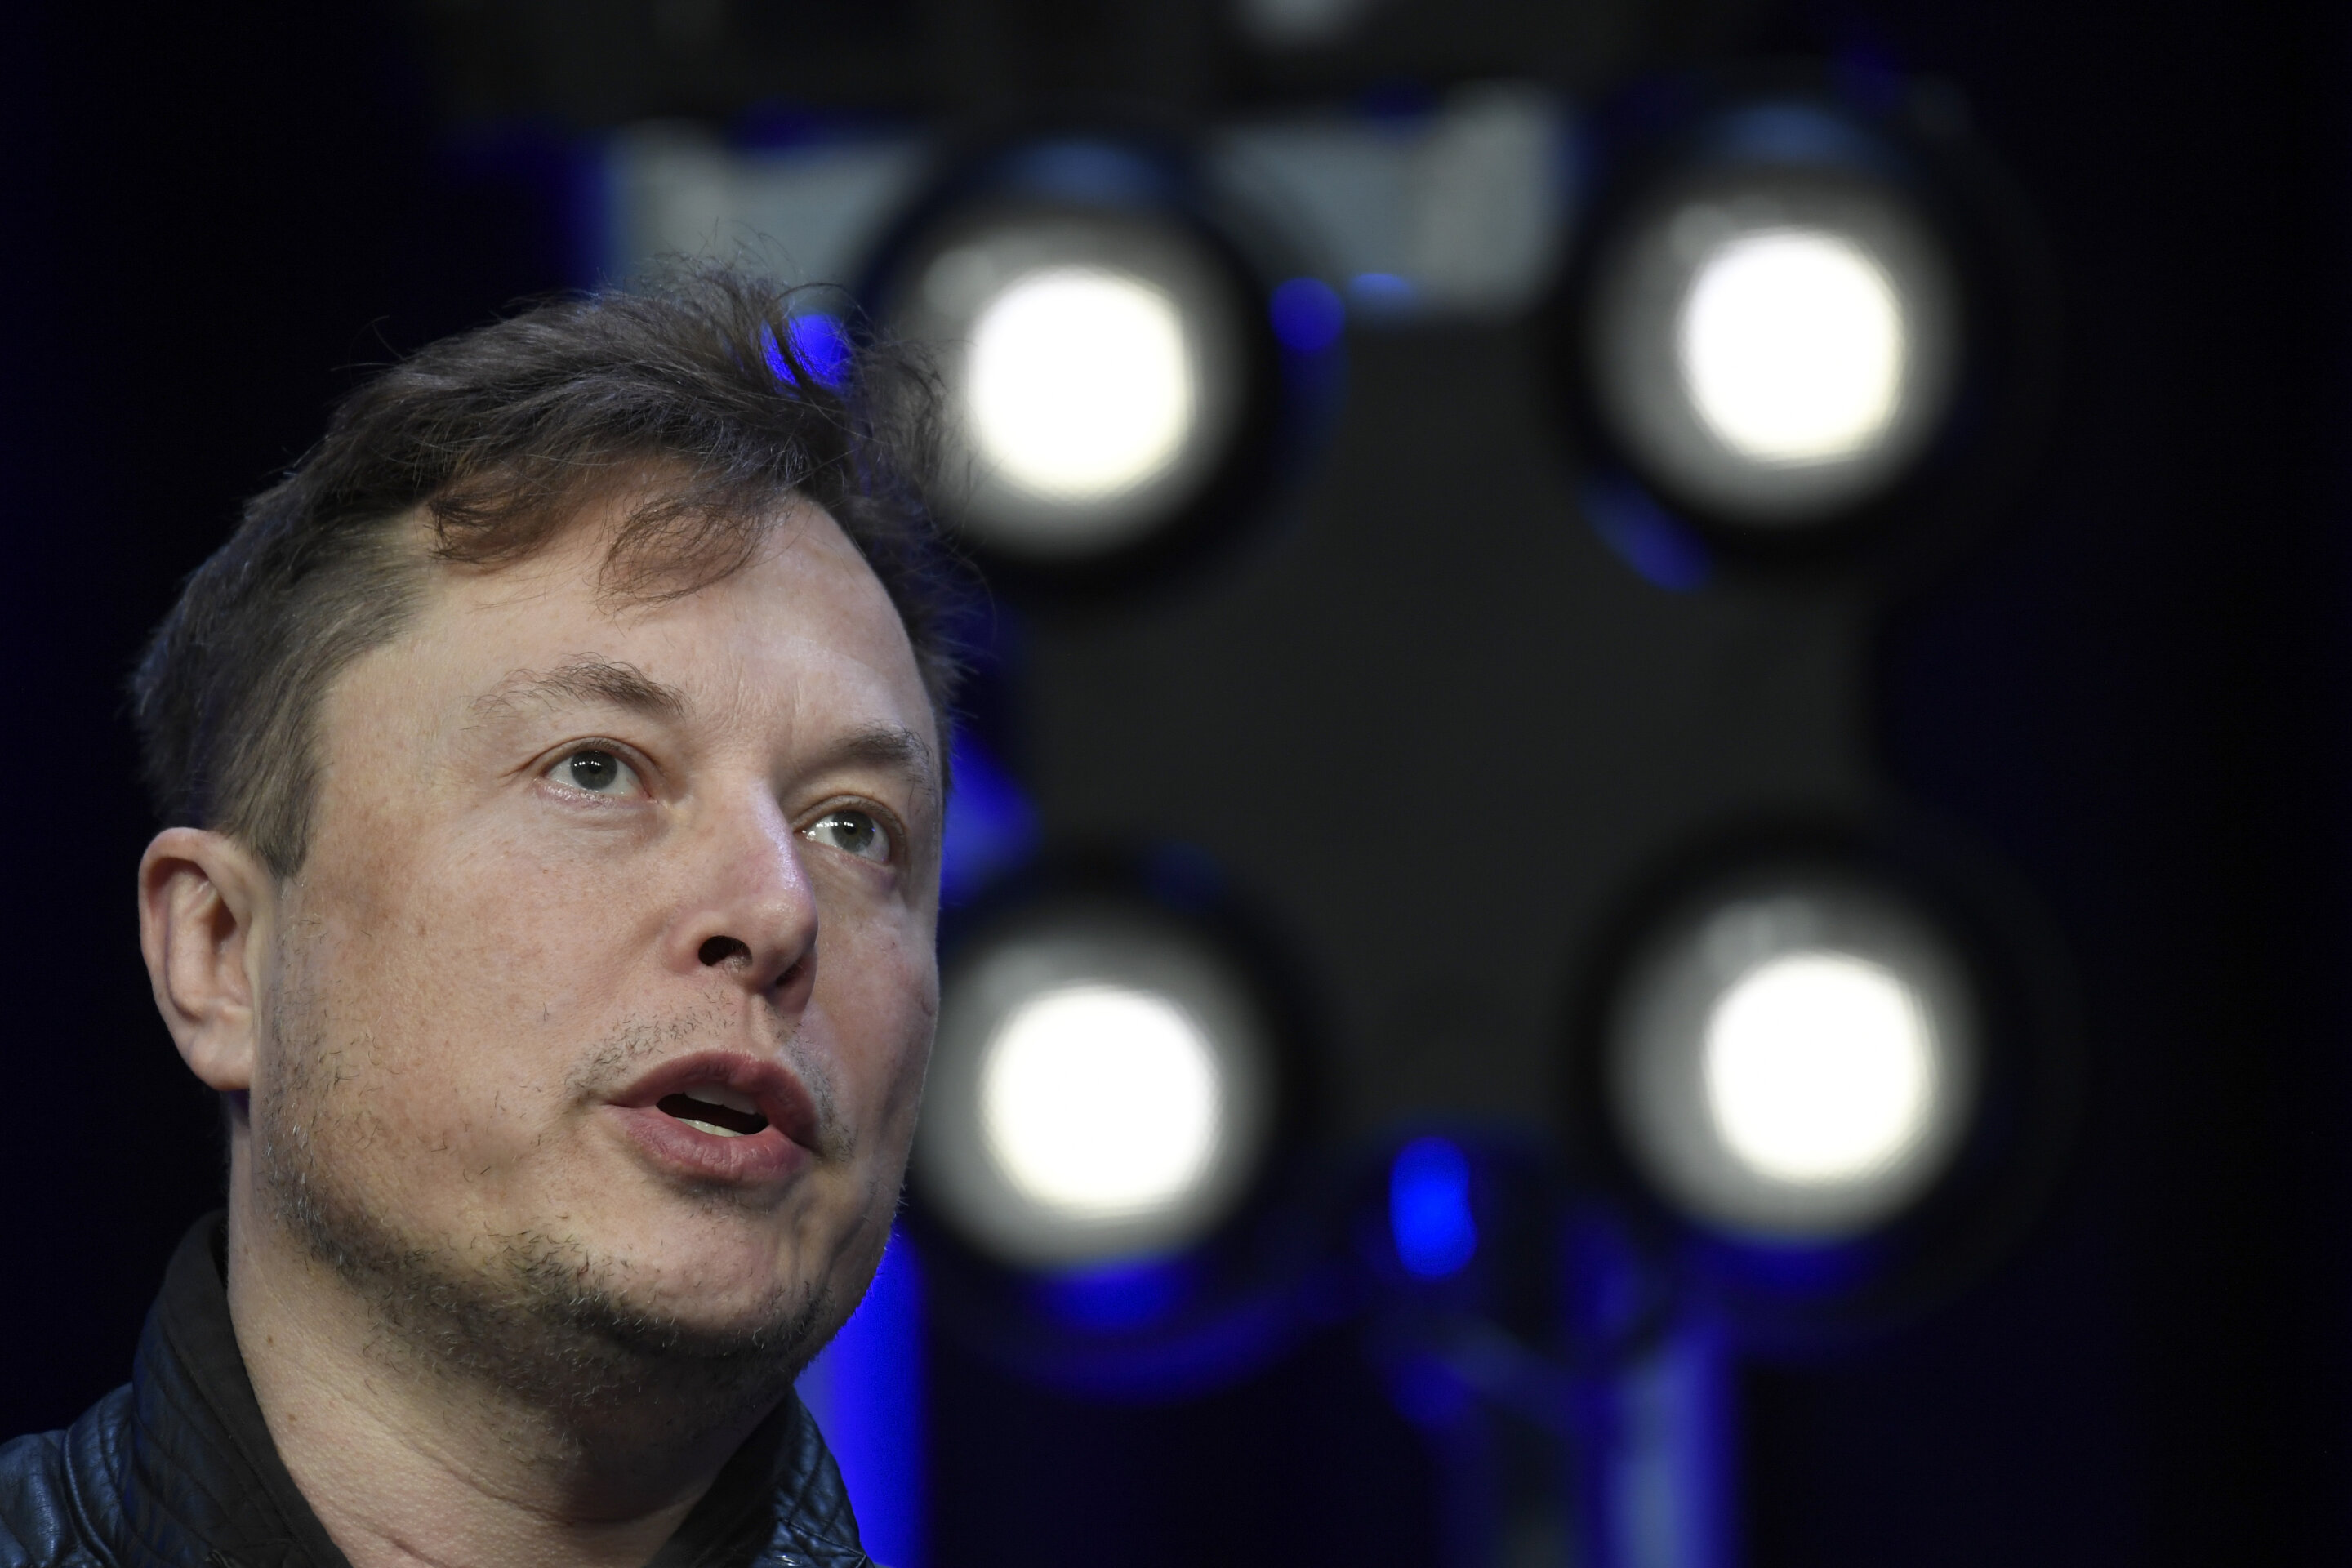 #Elon Musk says he’s terminating Twitter deal, board to fight